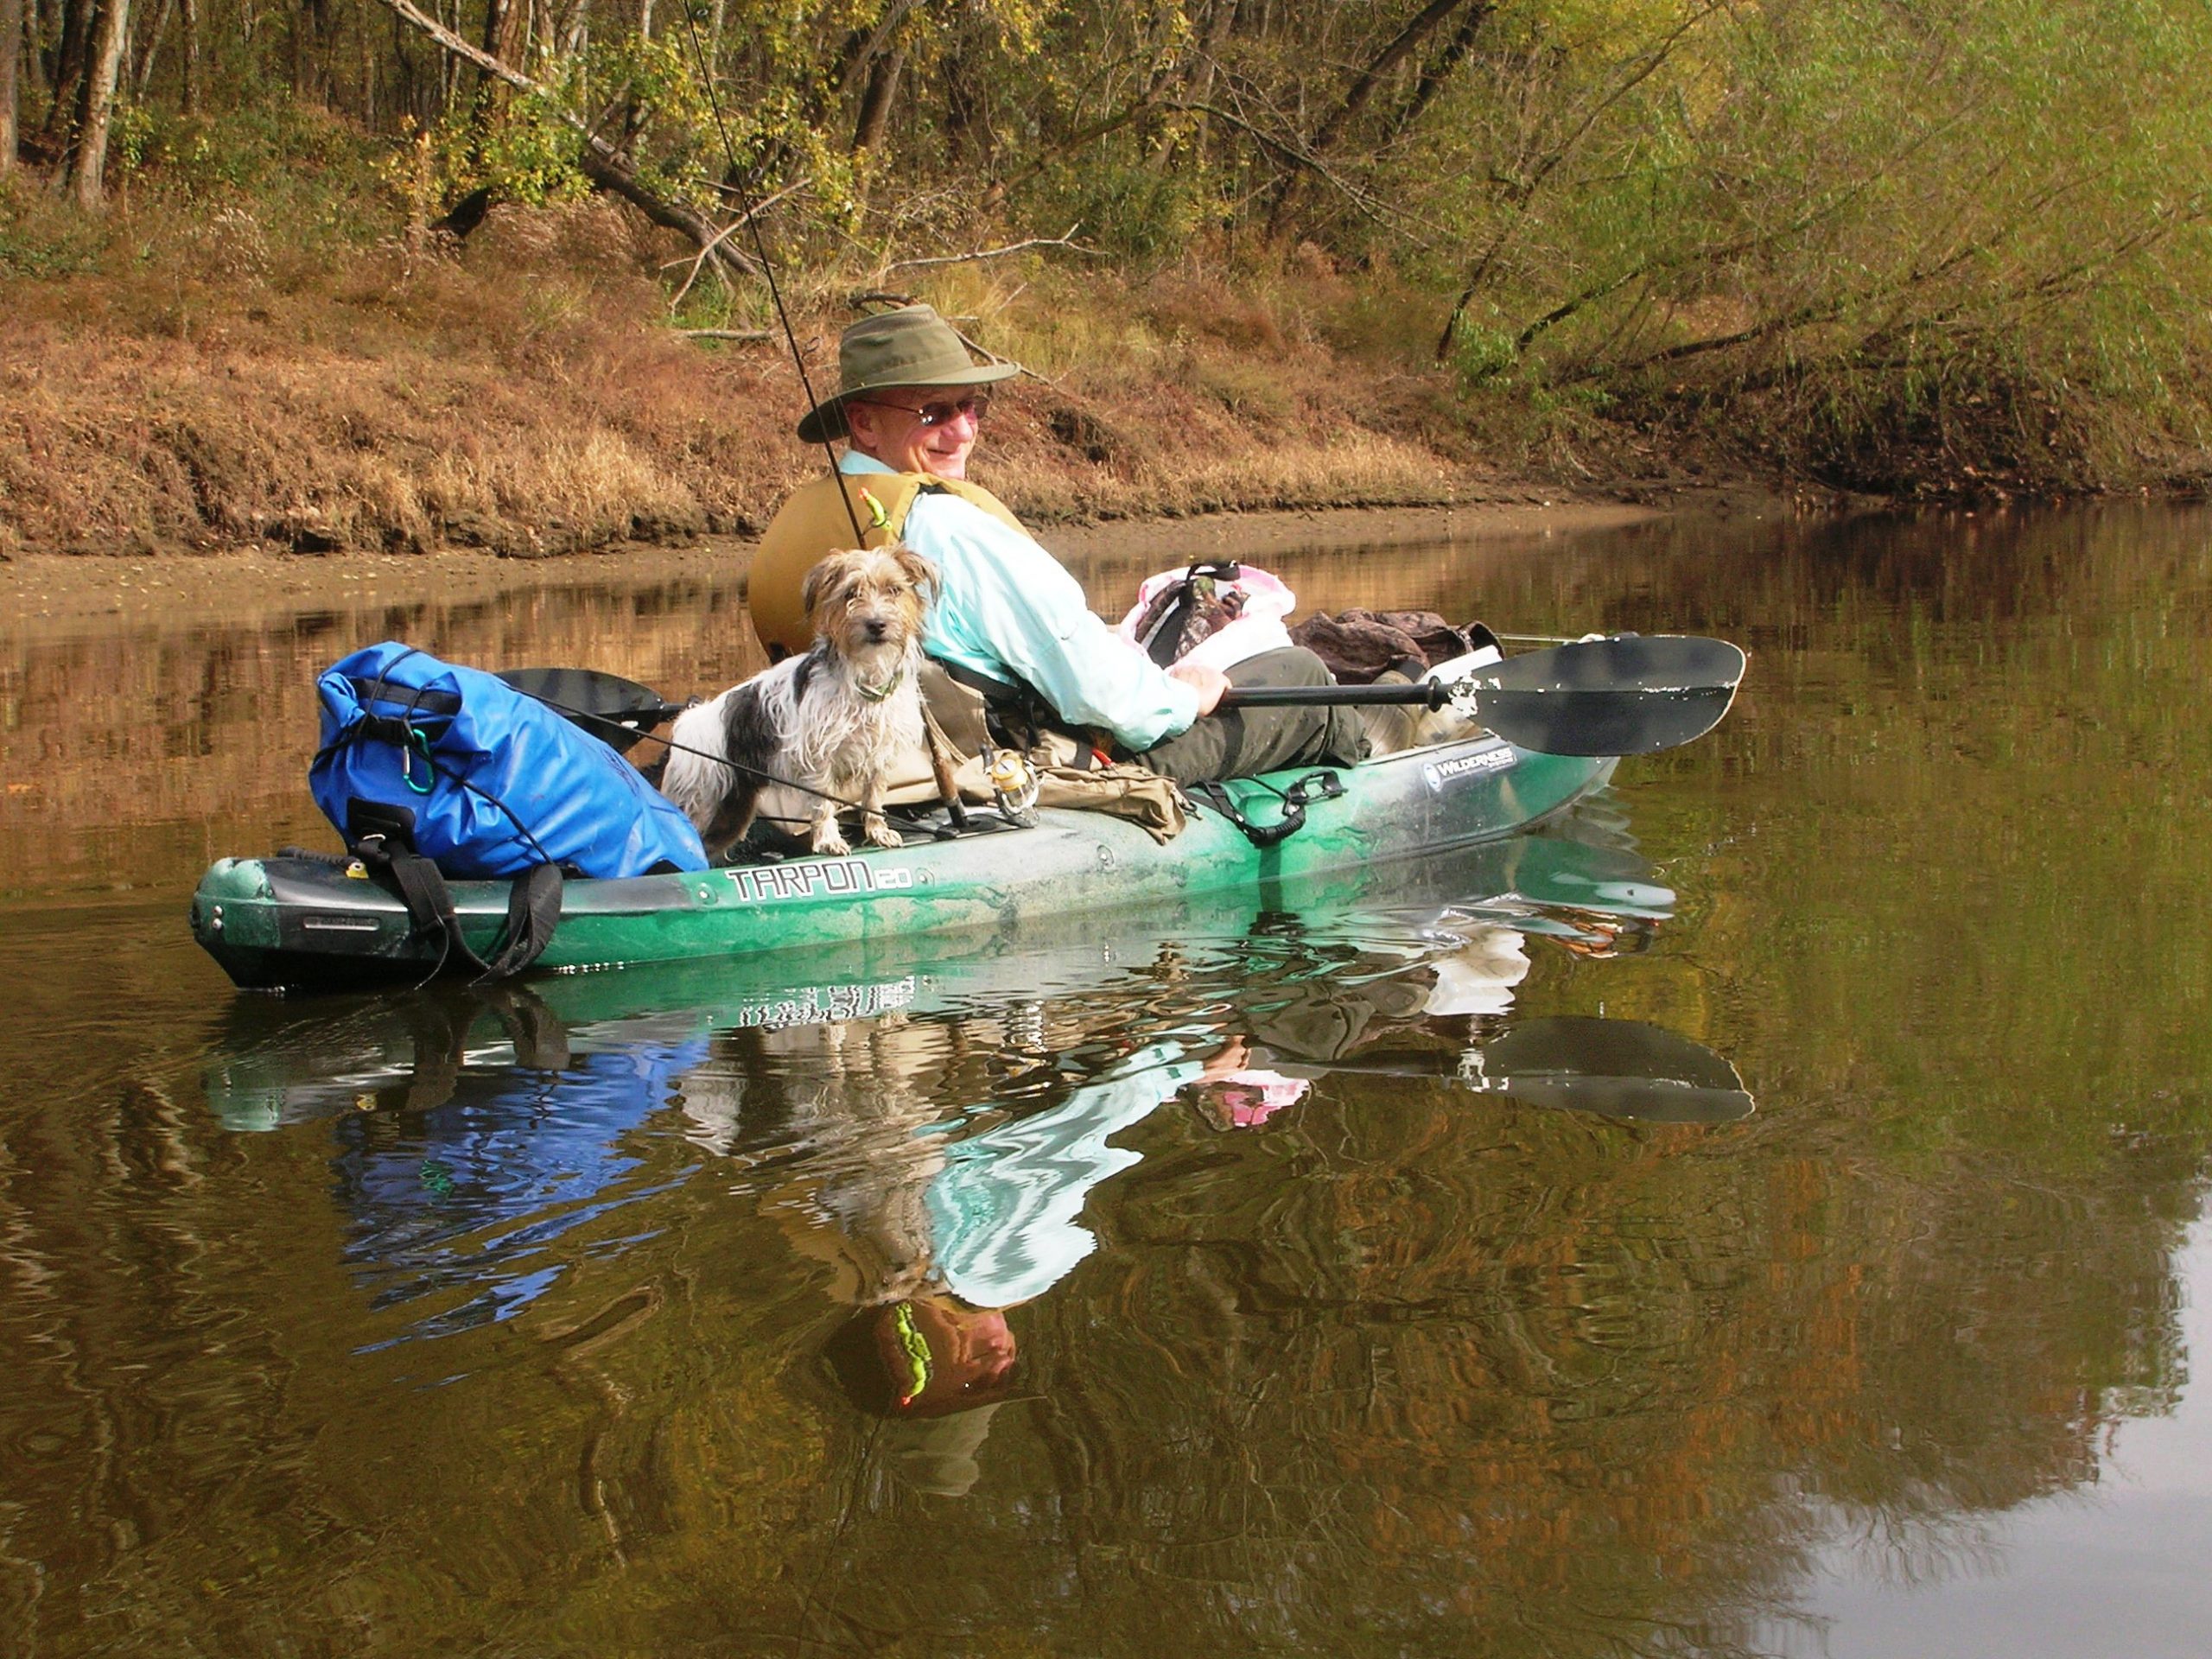 Dottie immediately became my constant companion and went just about everywhere with me, 
even kayaking!